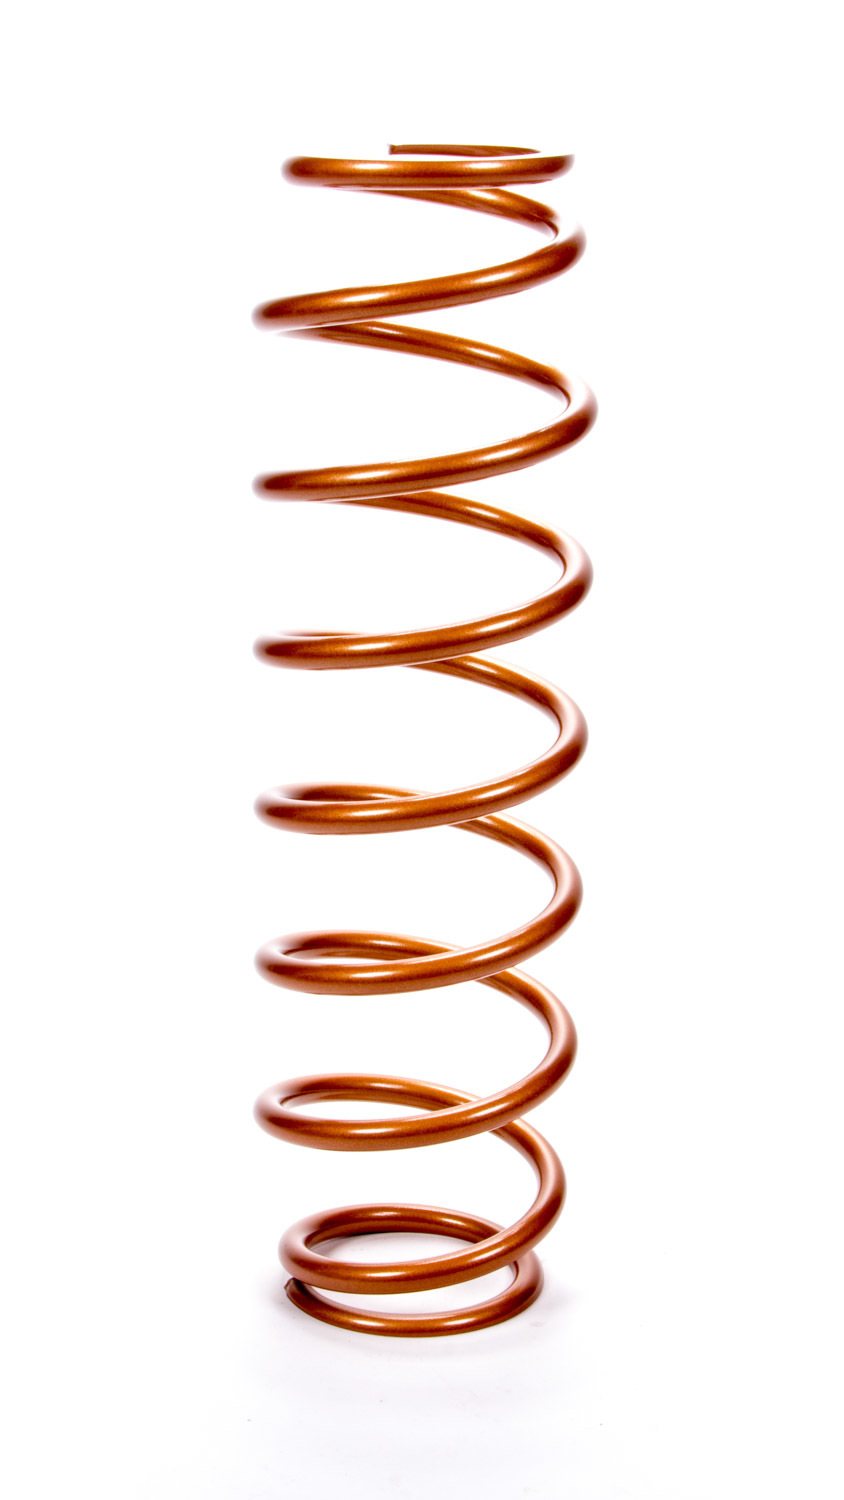 Swift Springs 140-250-175BP Coil Spring, Barrel, Coil-Over, 2.500 in ID, 14.000 in Length, 175 lb/in Spring Rate, Steel, Copper Powder Coat, Each